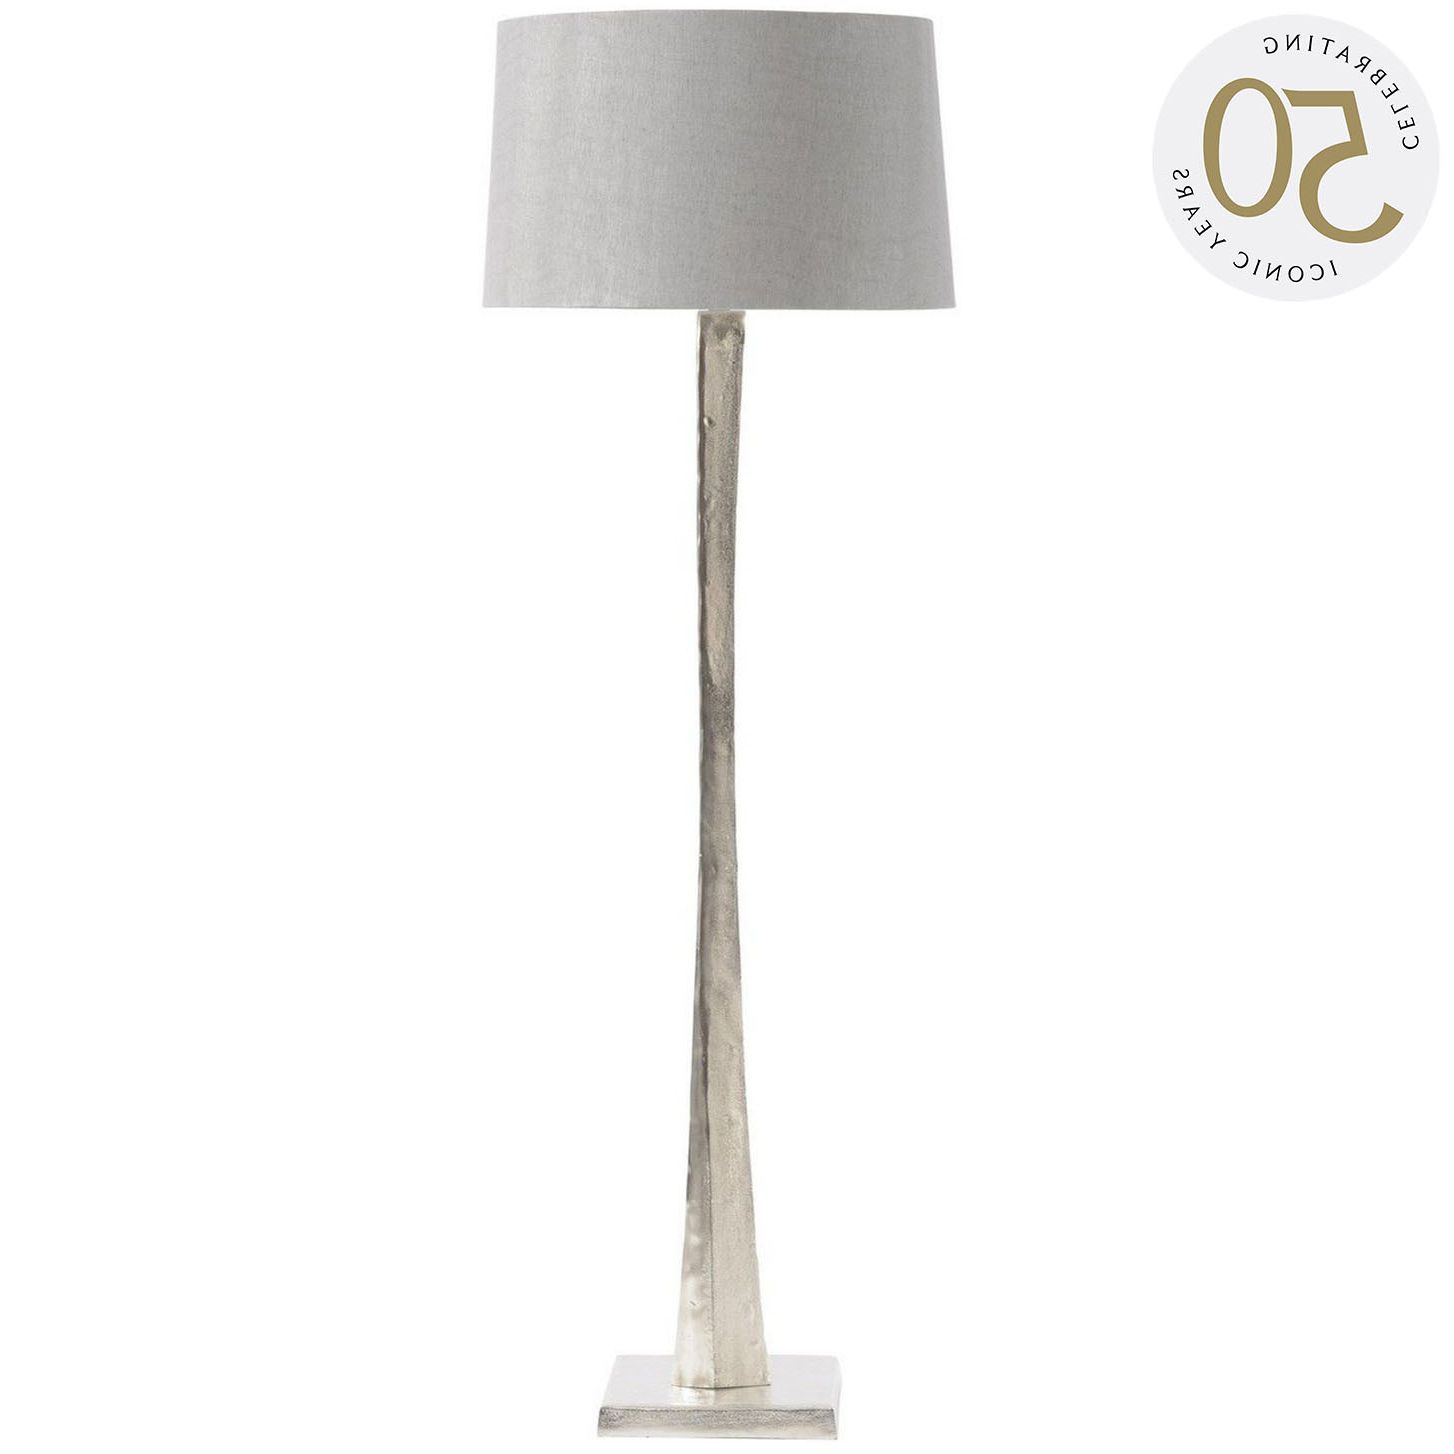 Trinity Floor Lamp With Grey Shade Throughout Grey Shade Floor Lamps (View 7 of 20)